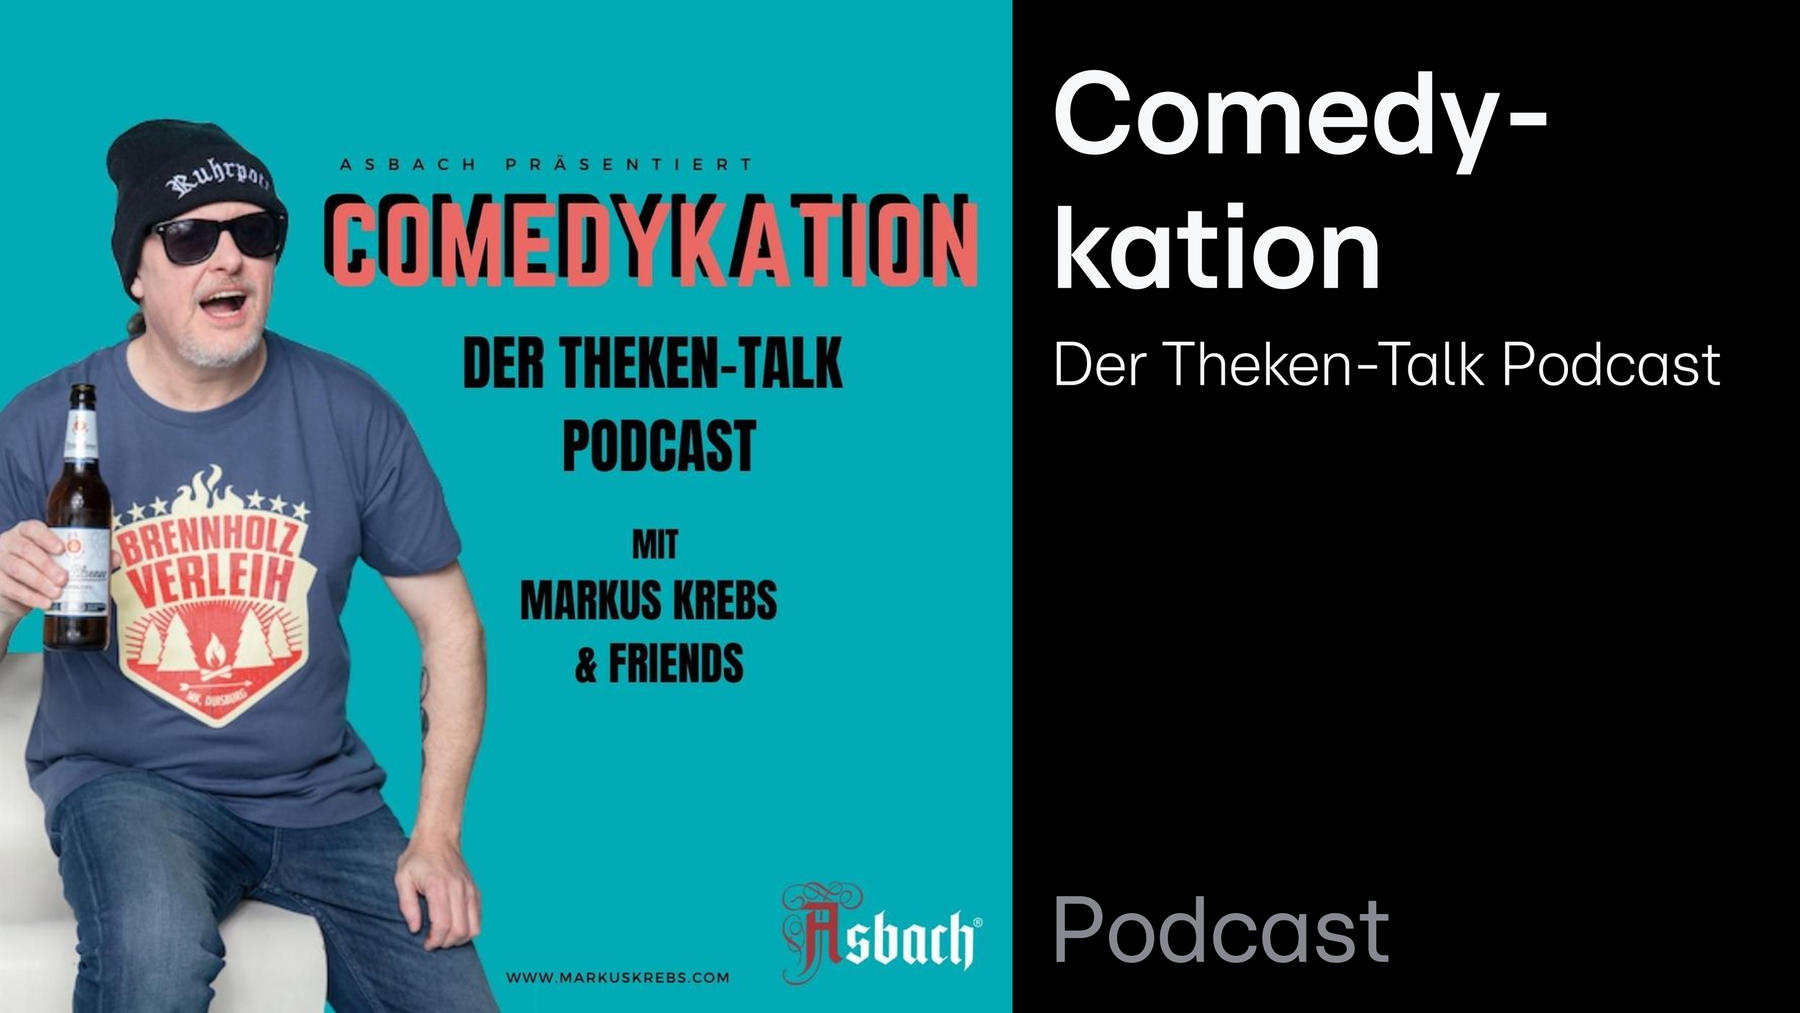 Podcast: Comedykation